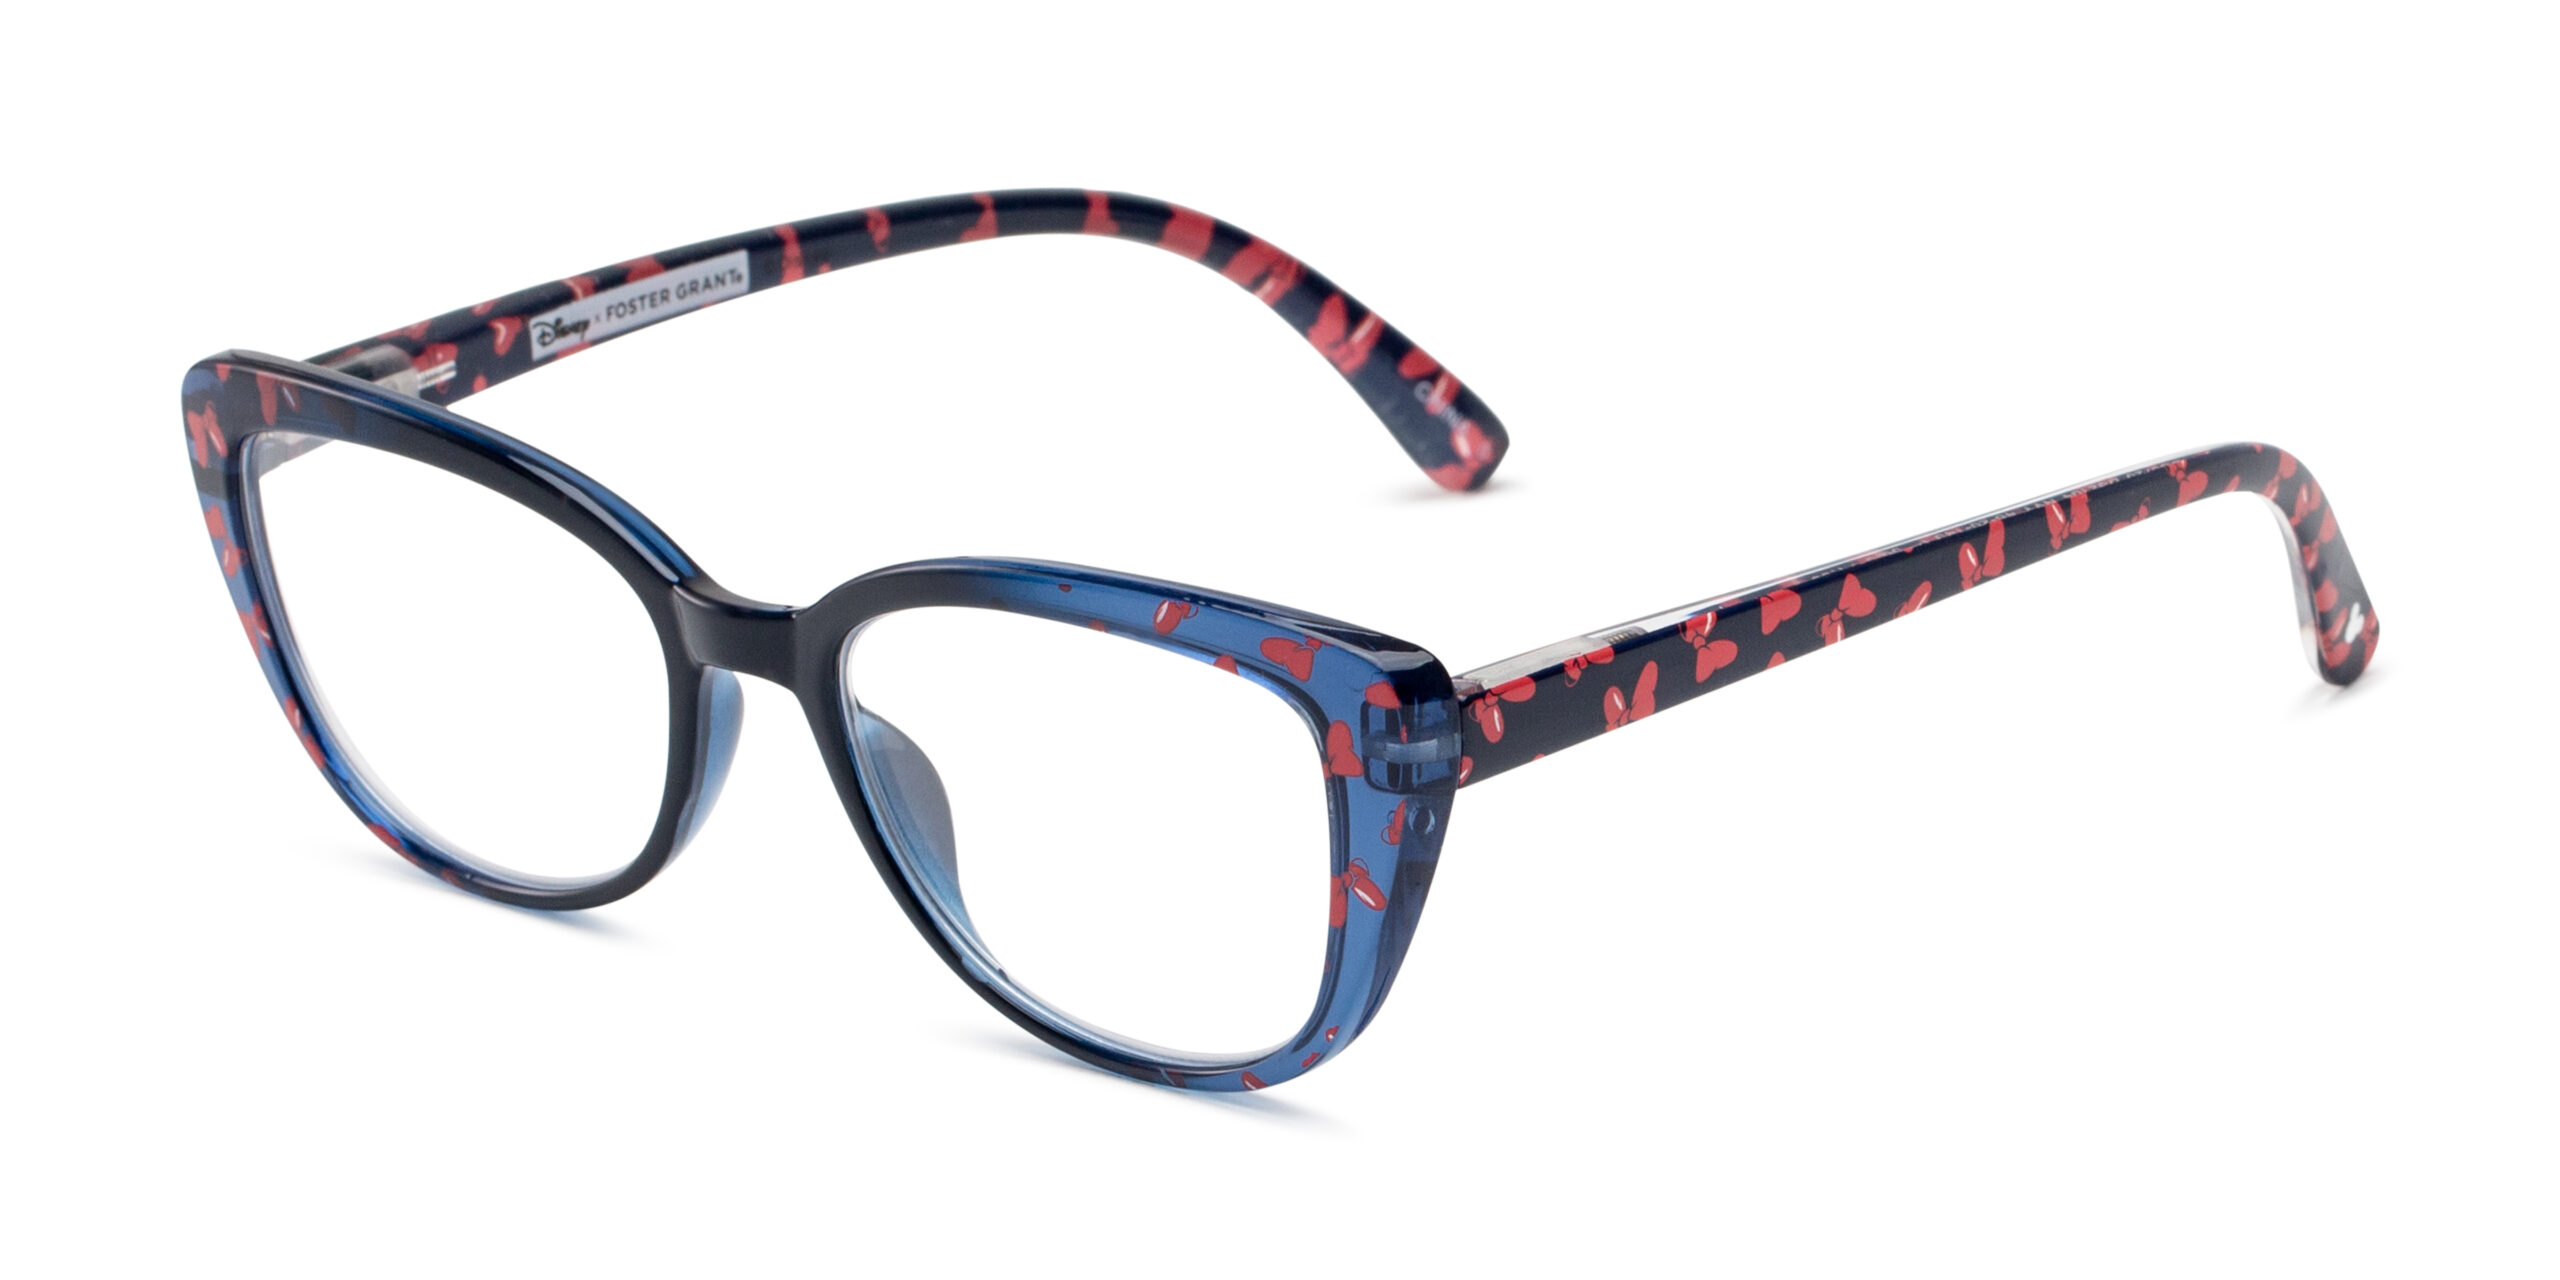 Foster Grant Teams Up with Disney for a whole new collection of reading glasses